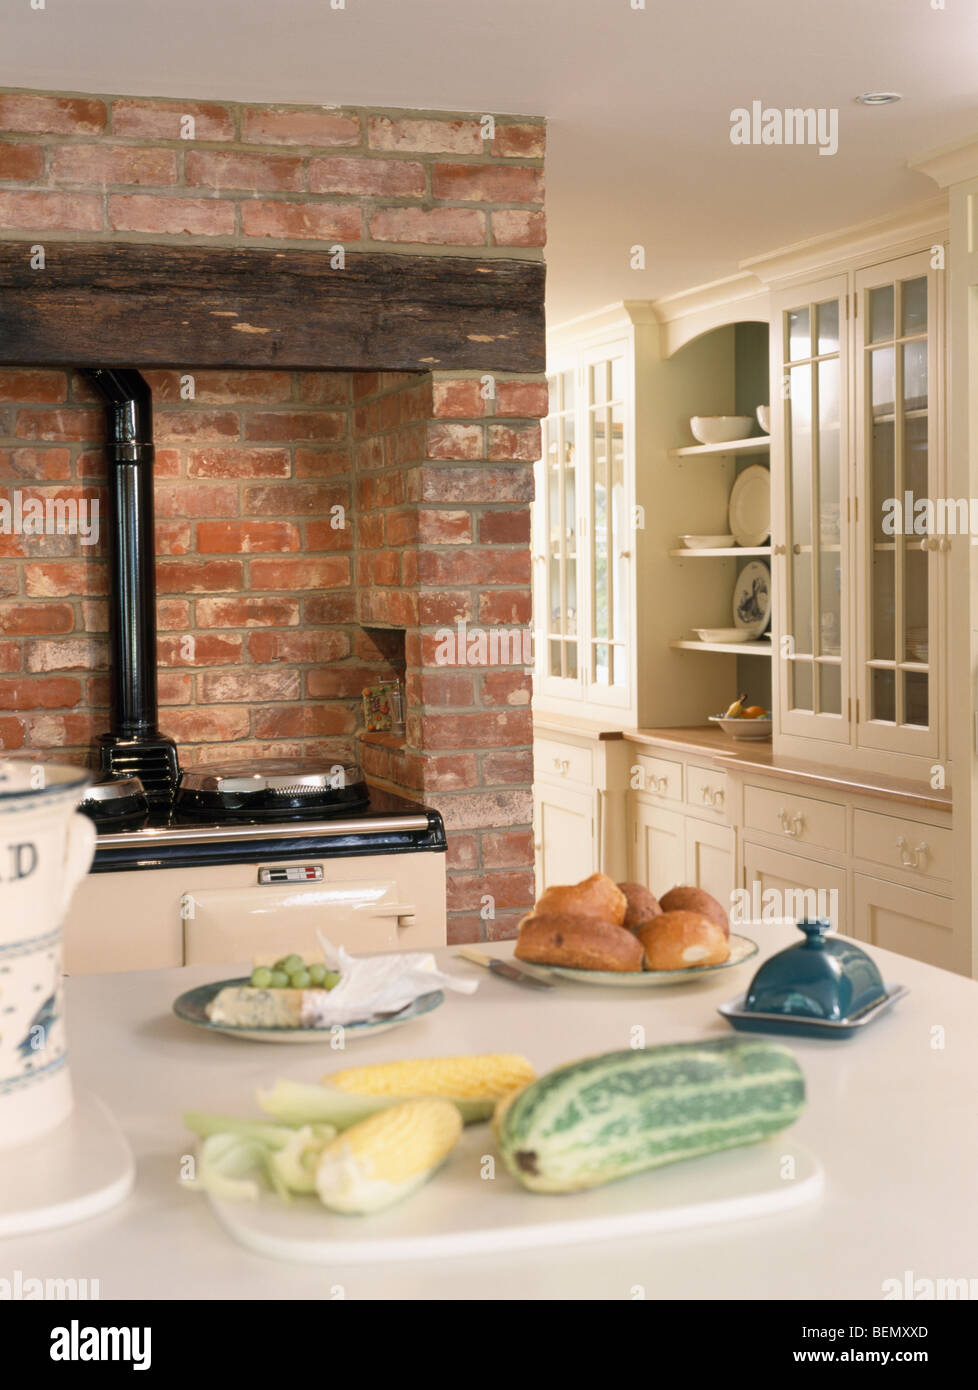 Vegetables on table in cottage kitchen with Aga oven in exposed brick fireplace Stock Photo